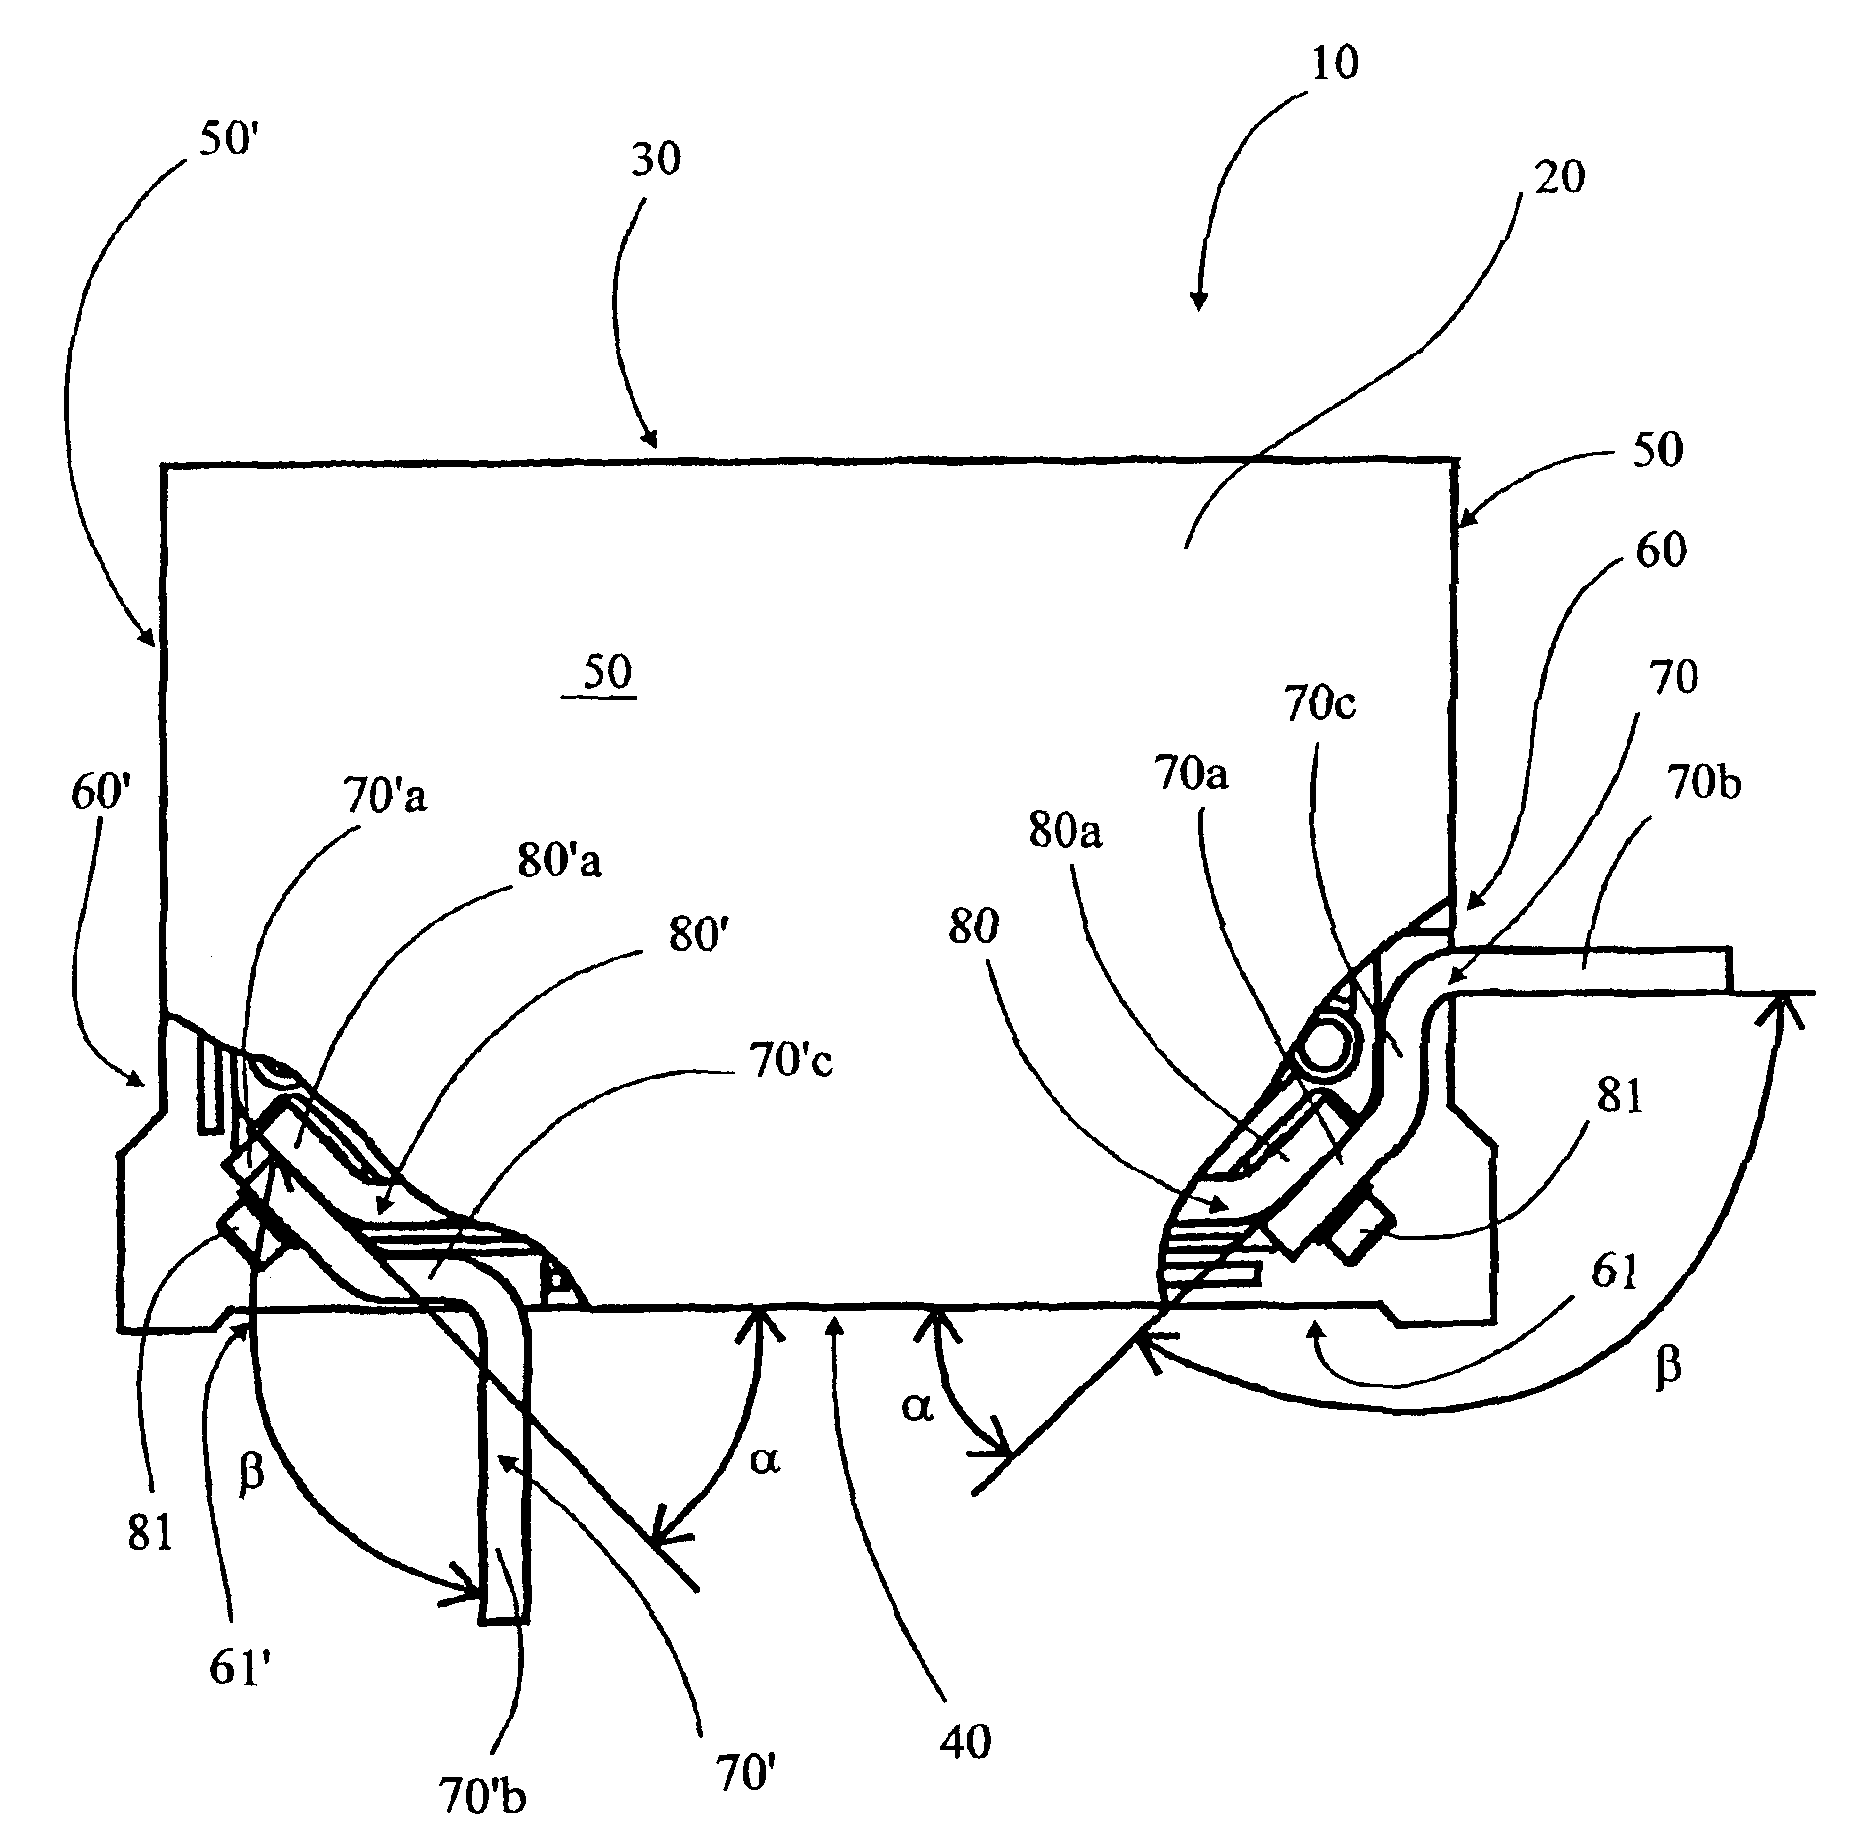 Electrical apparatus intended for mounting on a subframe